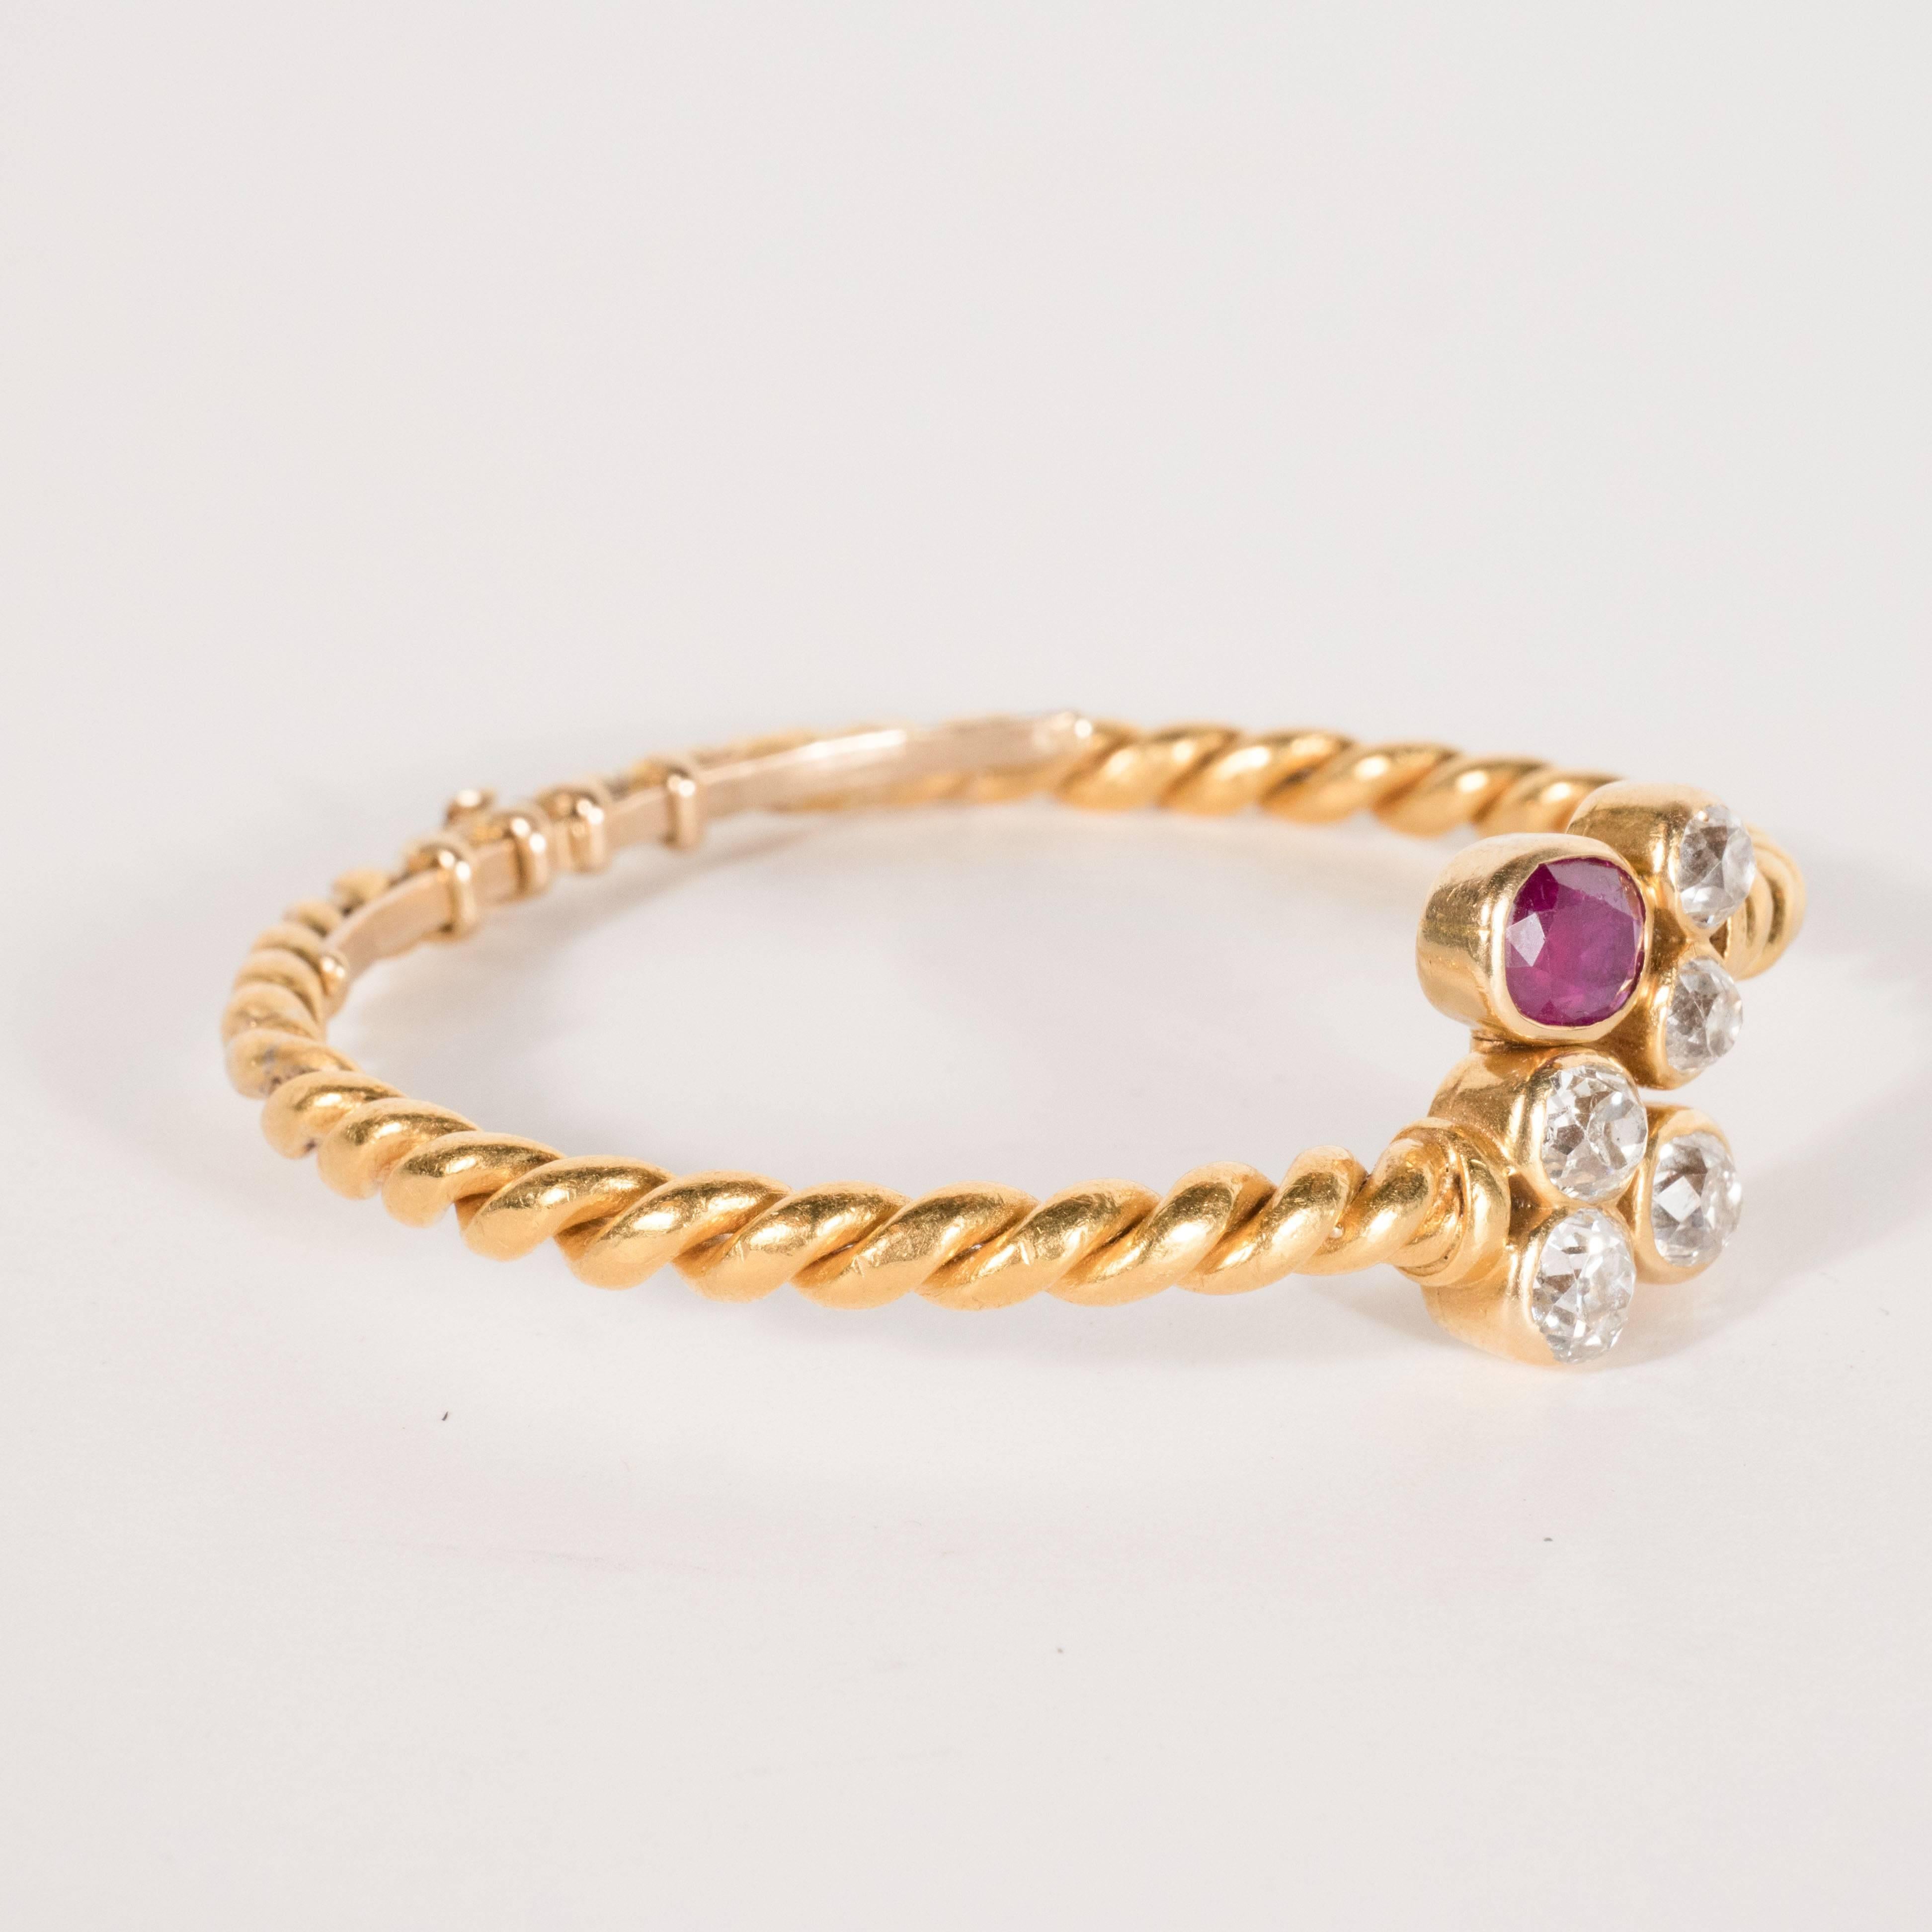 Hand-Wrought 18 Karat Bangle Bracelet with Ruby and Old European Cut Diamonds 2